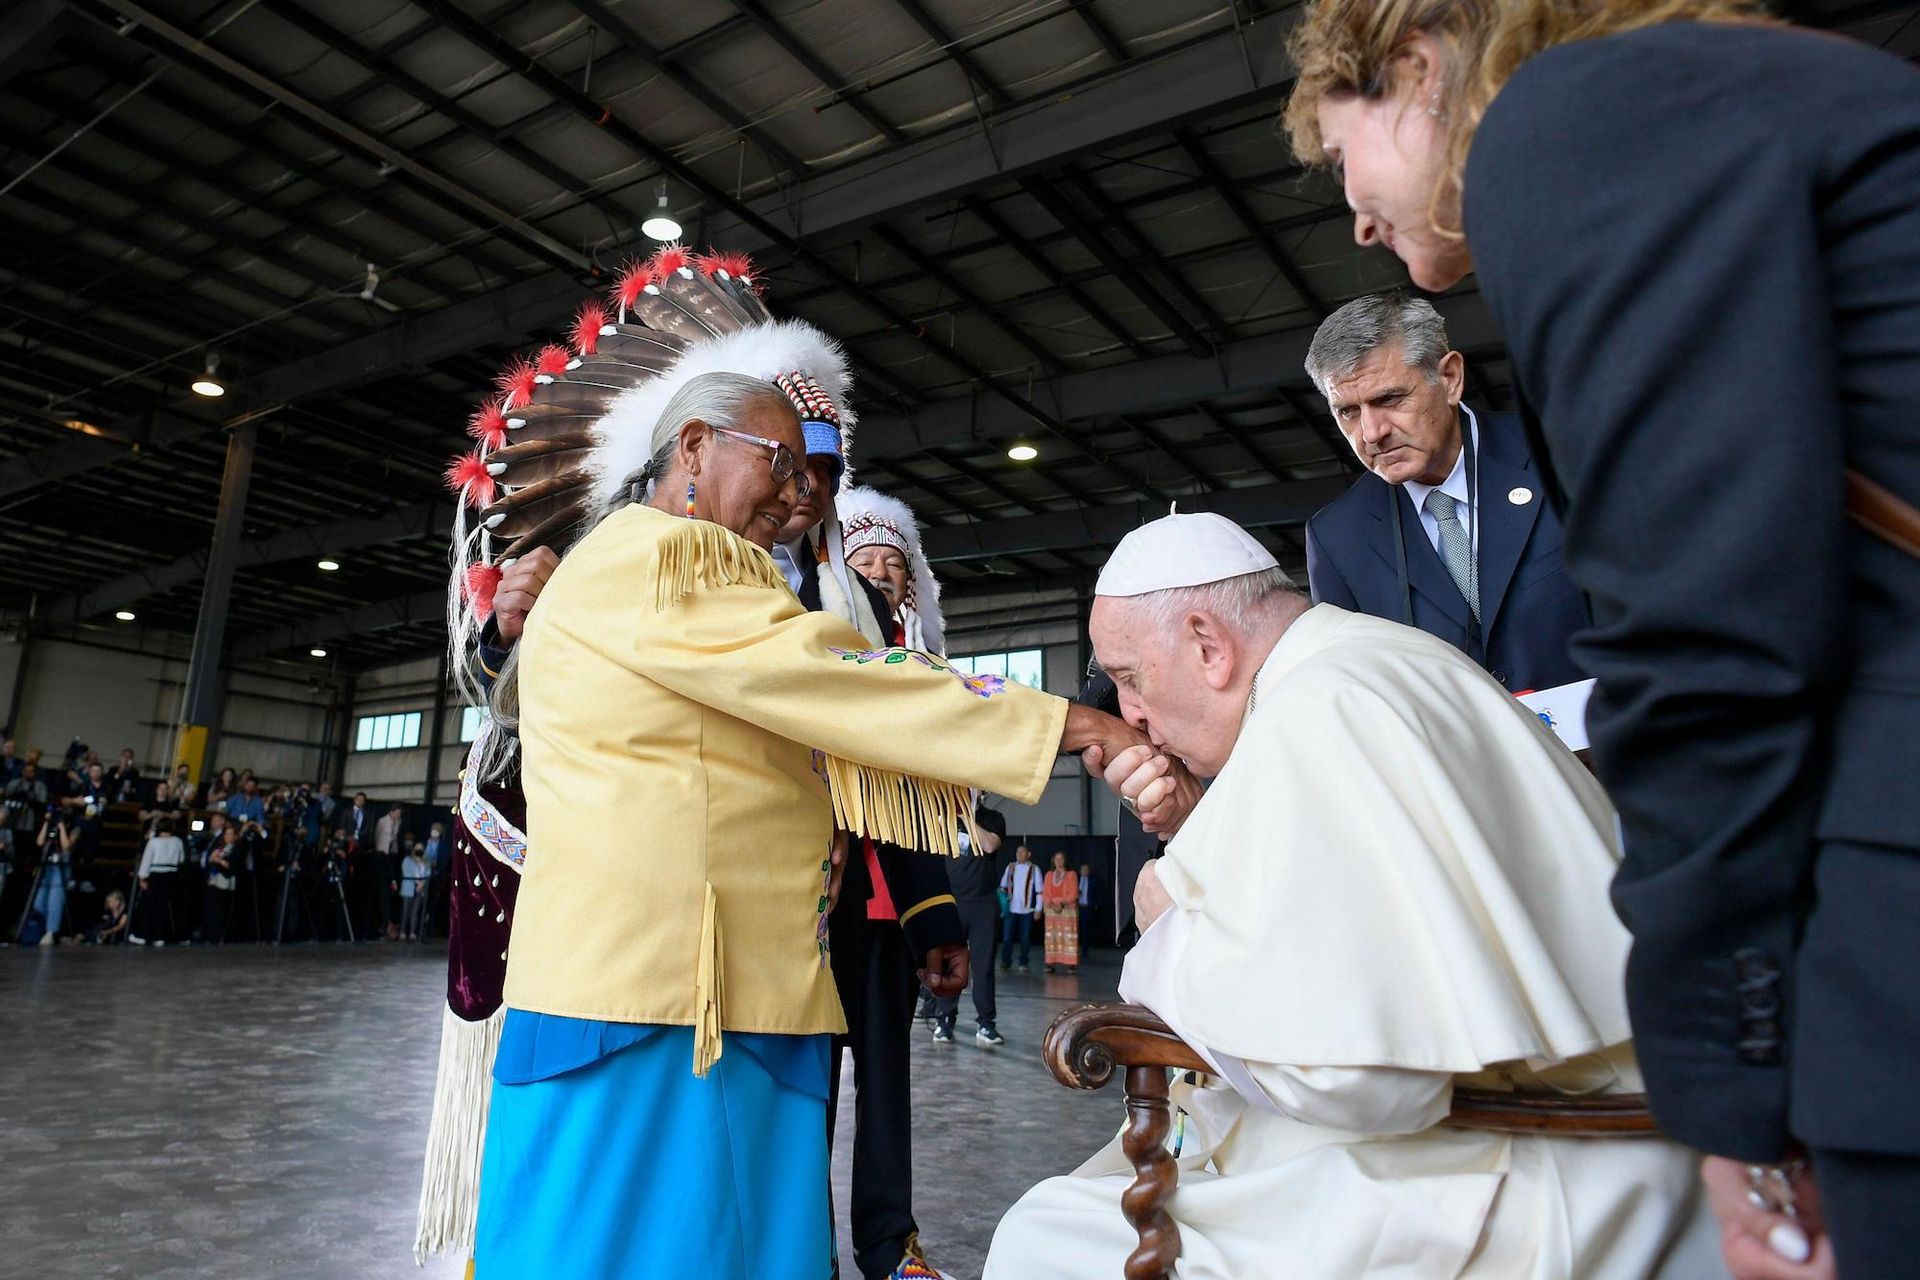 Pope Francis meets representatives from First Nations communities during his welcoming ceremony at Edmonton International Airport in Alberta, Canada Photograph by Vatican Mediia/Catholic Press Photo. Credit: Independent Photo Agency/Alamy Live News